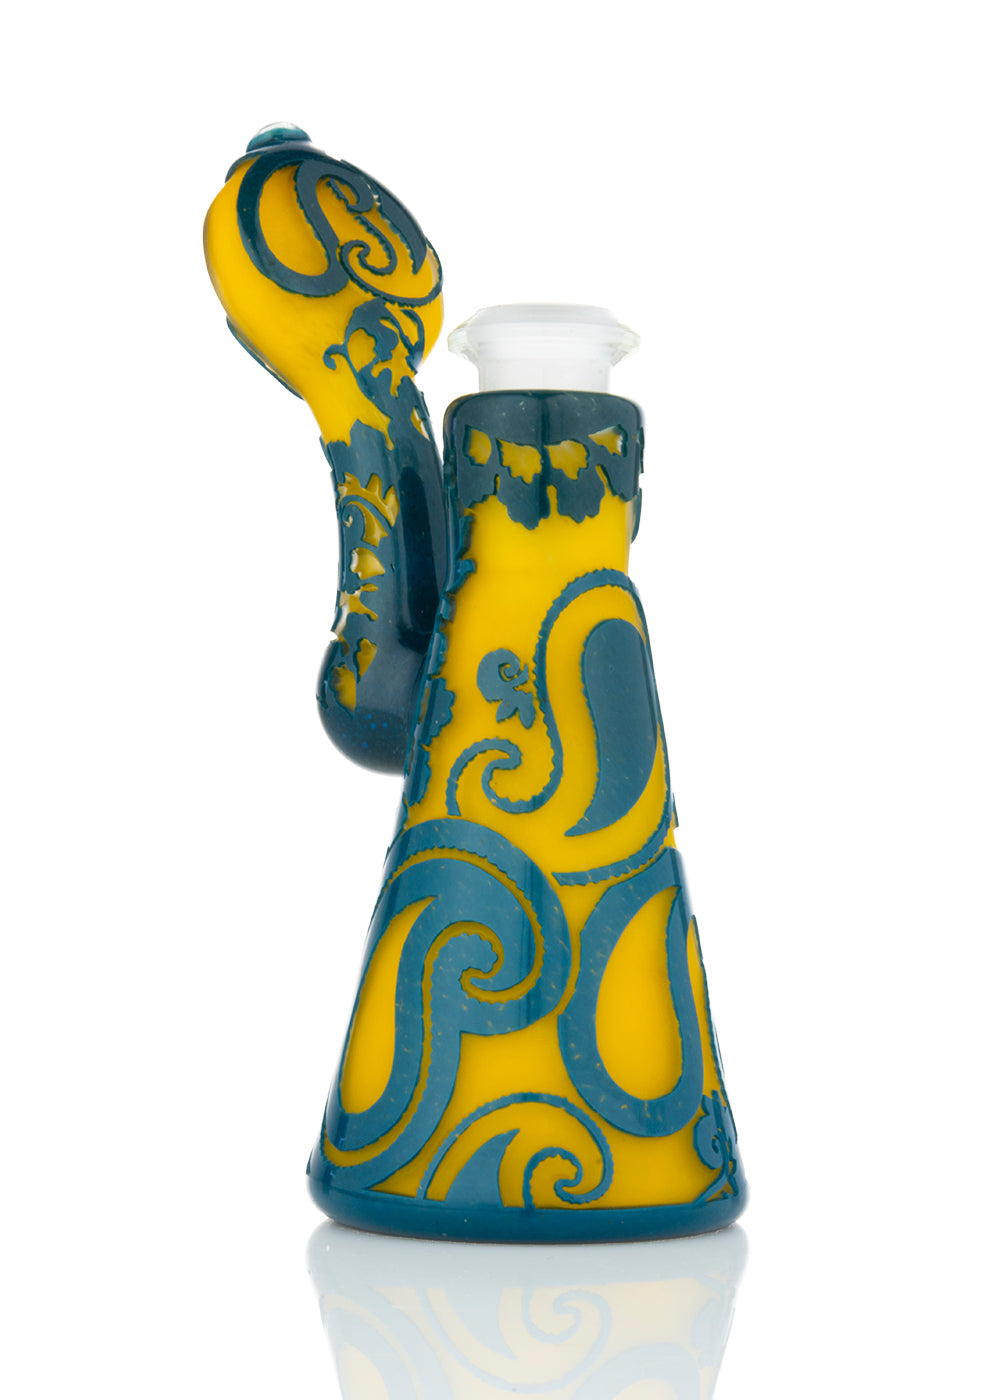 Standing Sherlock Rig in Blue and Yellow by Liberty 503